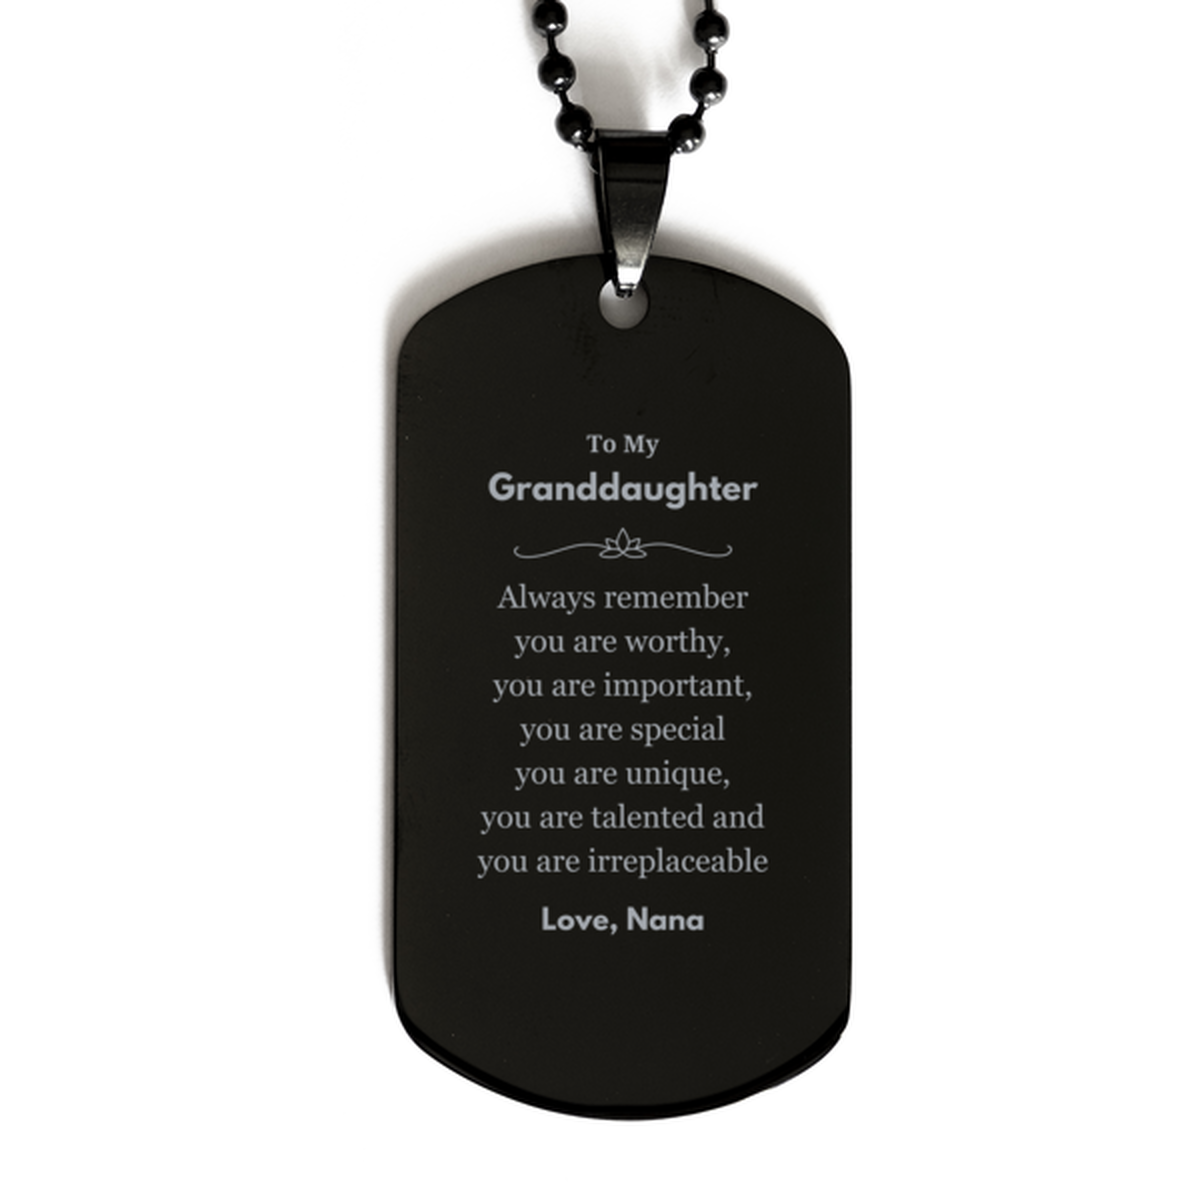 Granddaughter Birthday Gifts from Nana, Inspirational Black Dog Tag for Granddaughter Christmas Graduation Gifts for Granddaughter Always remember you are worthy, you are important. Love, Nana